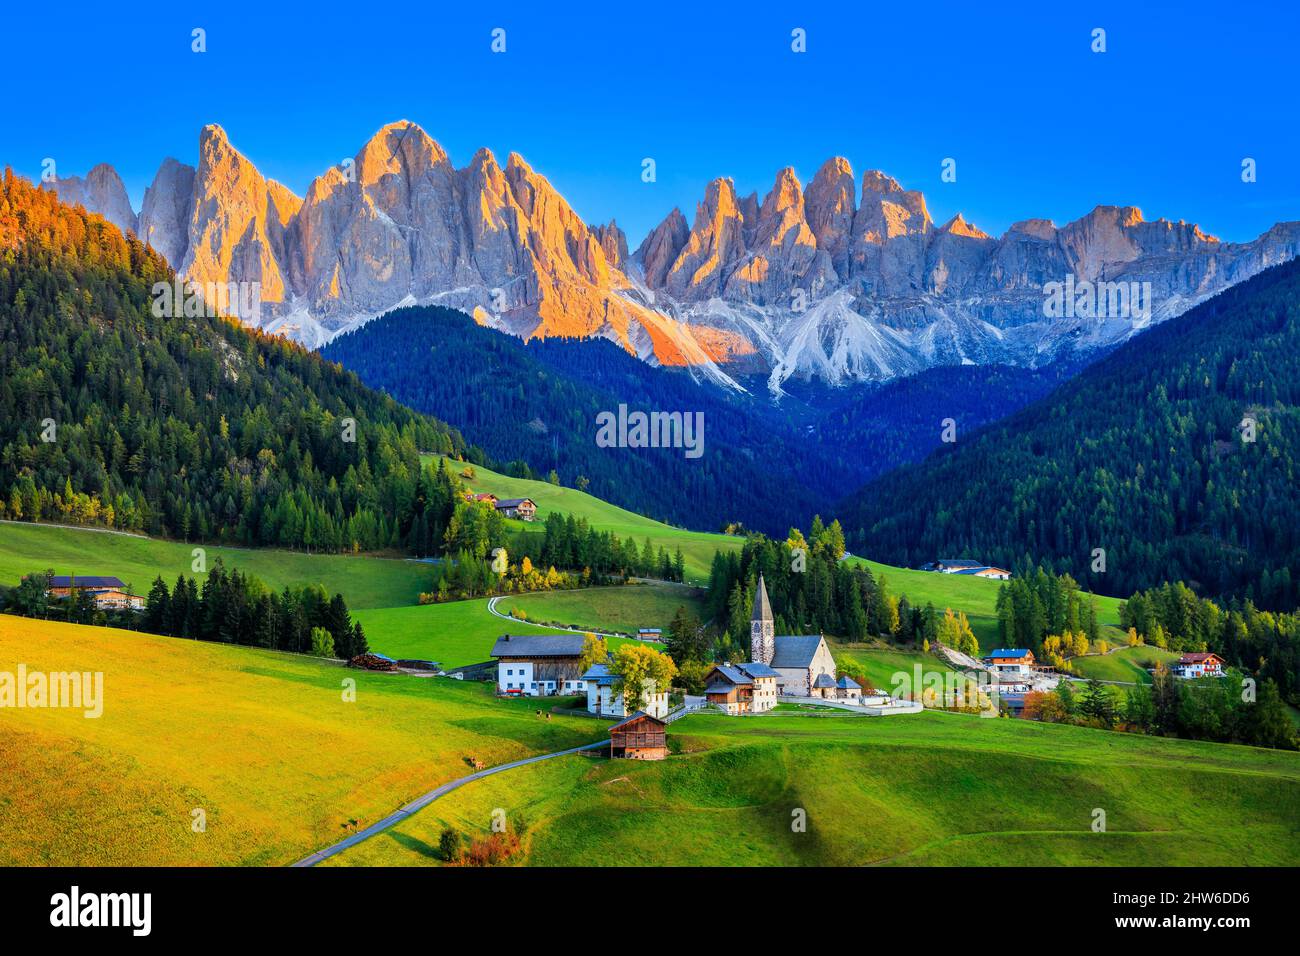 Val di Funes, Dolomites, Italy. Santa Maddalena village in front of the Odle(Geisler) mountain group. Stock Photo